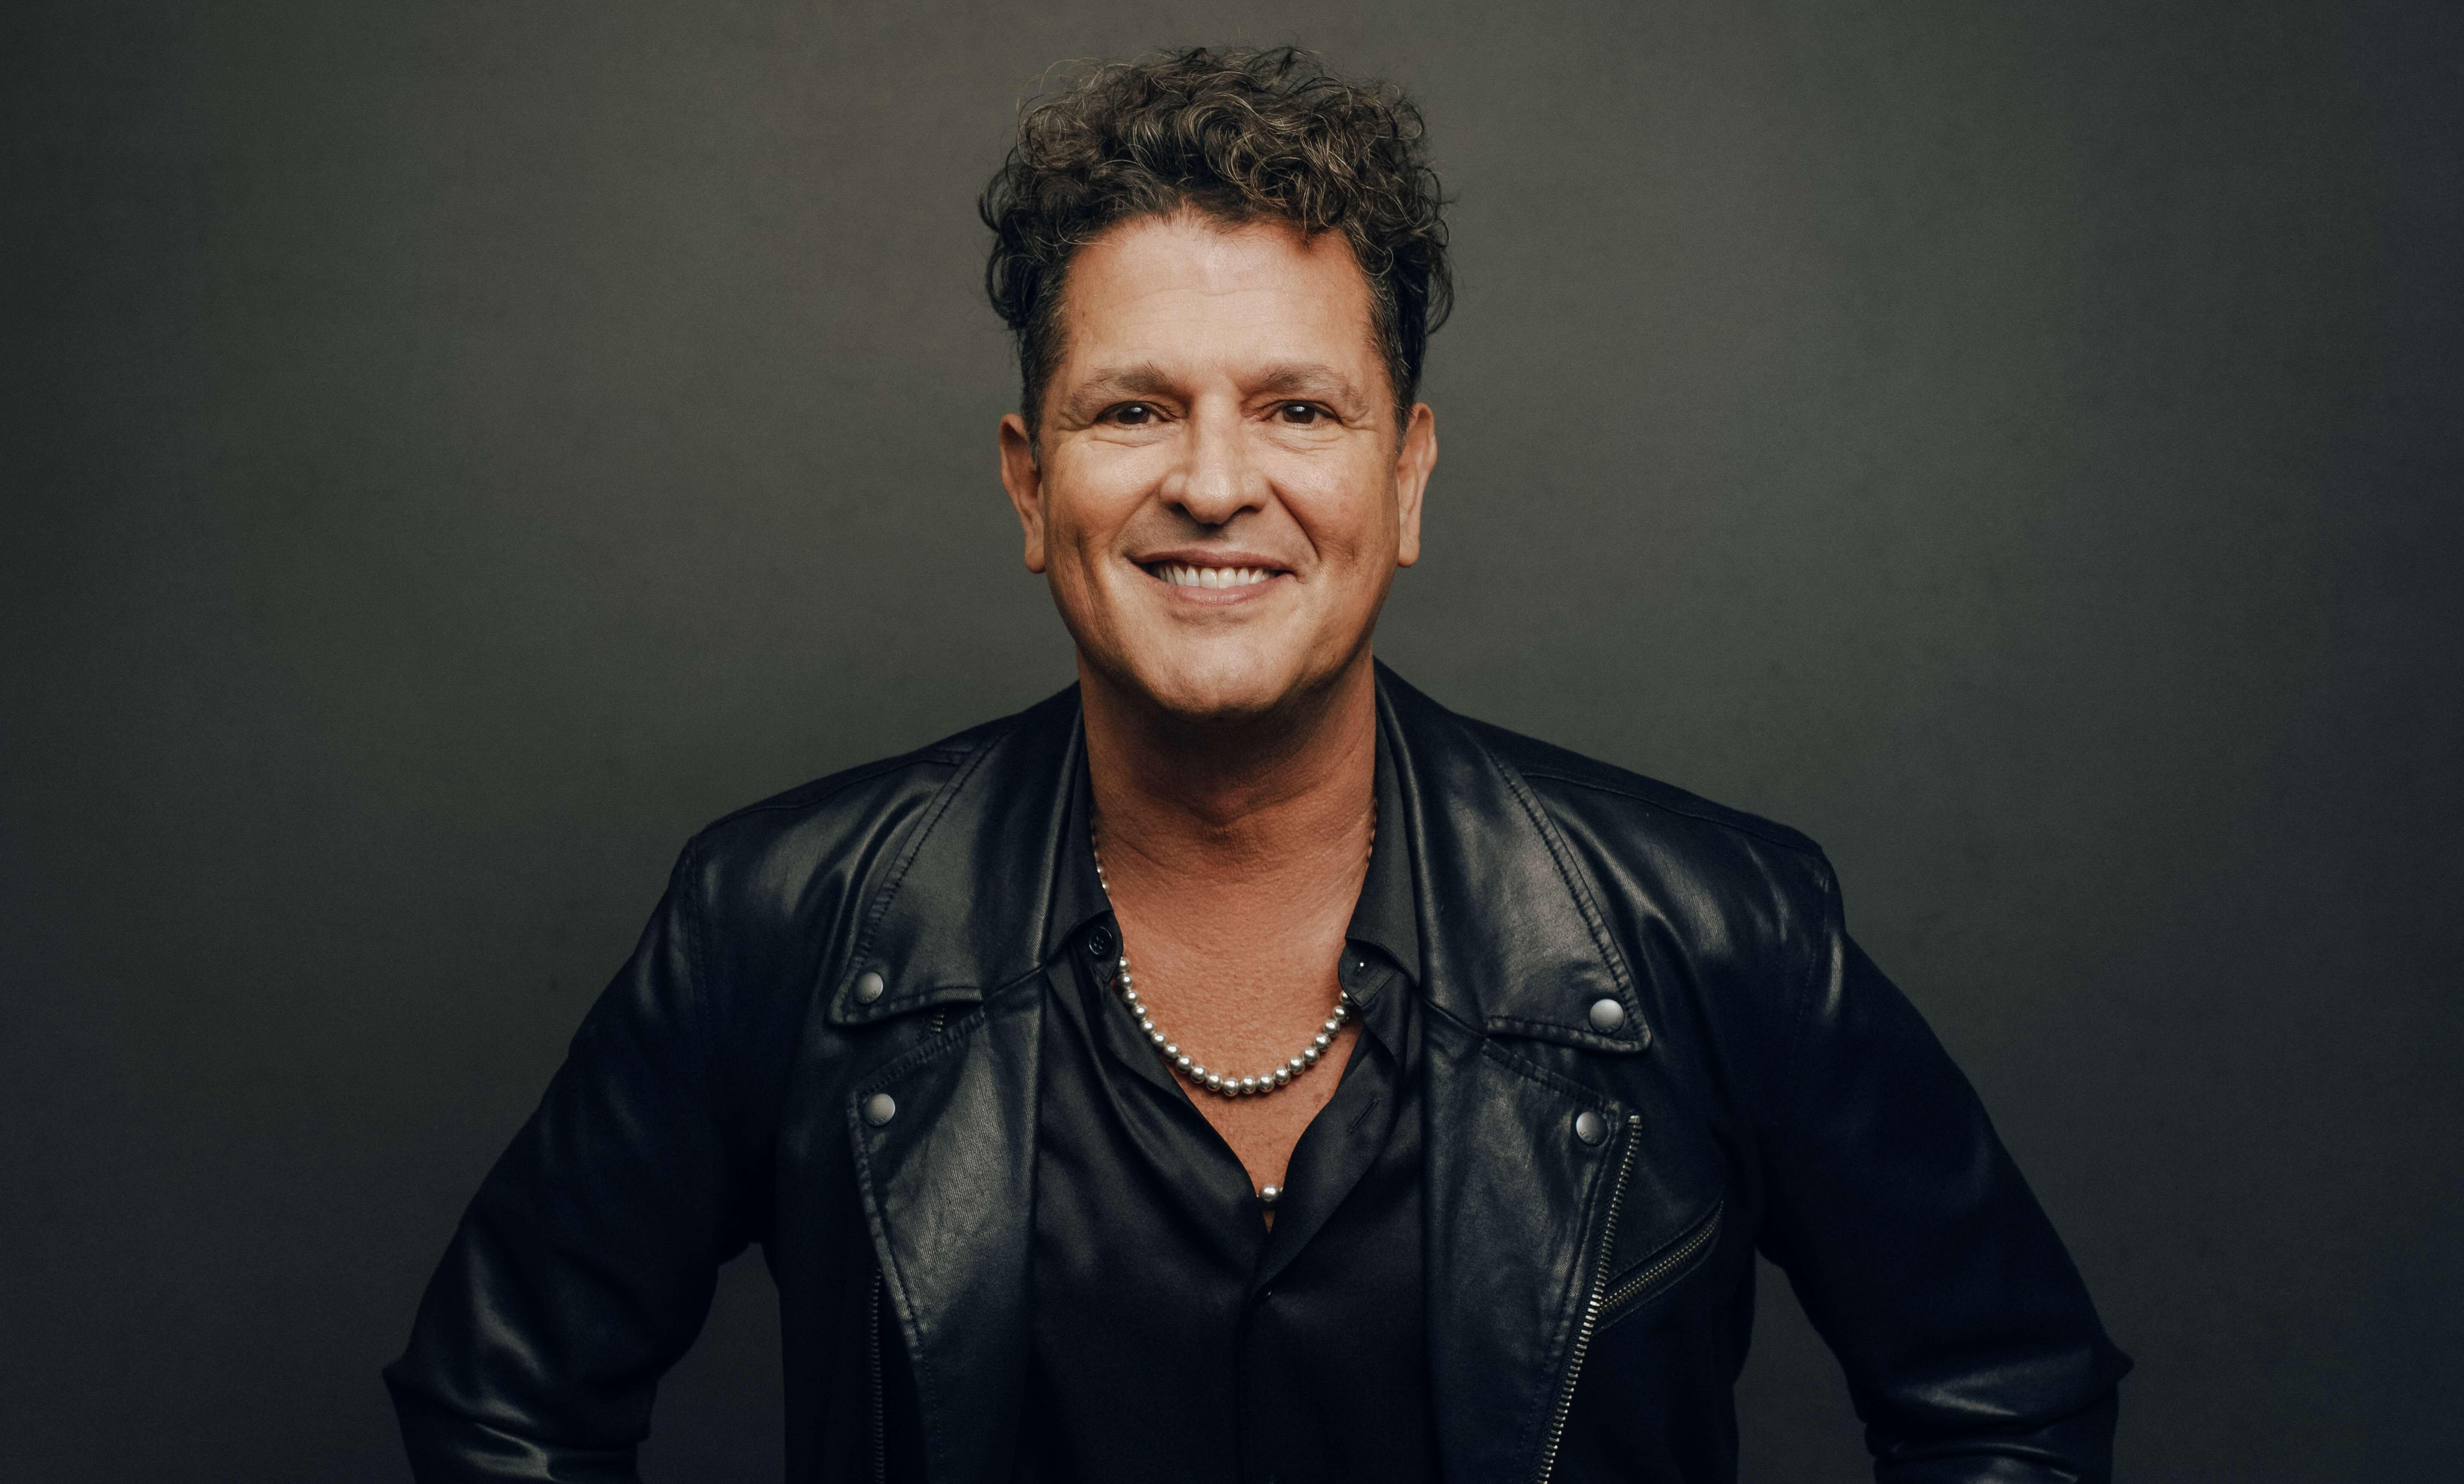 Photo of Carlos Vives wearing a black shirt, black leather jacket and a silver necklace.